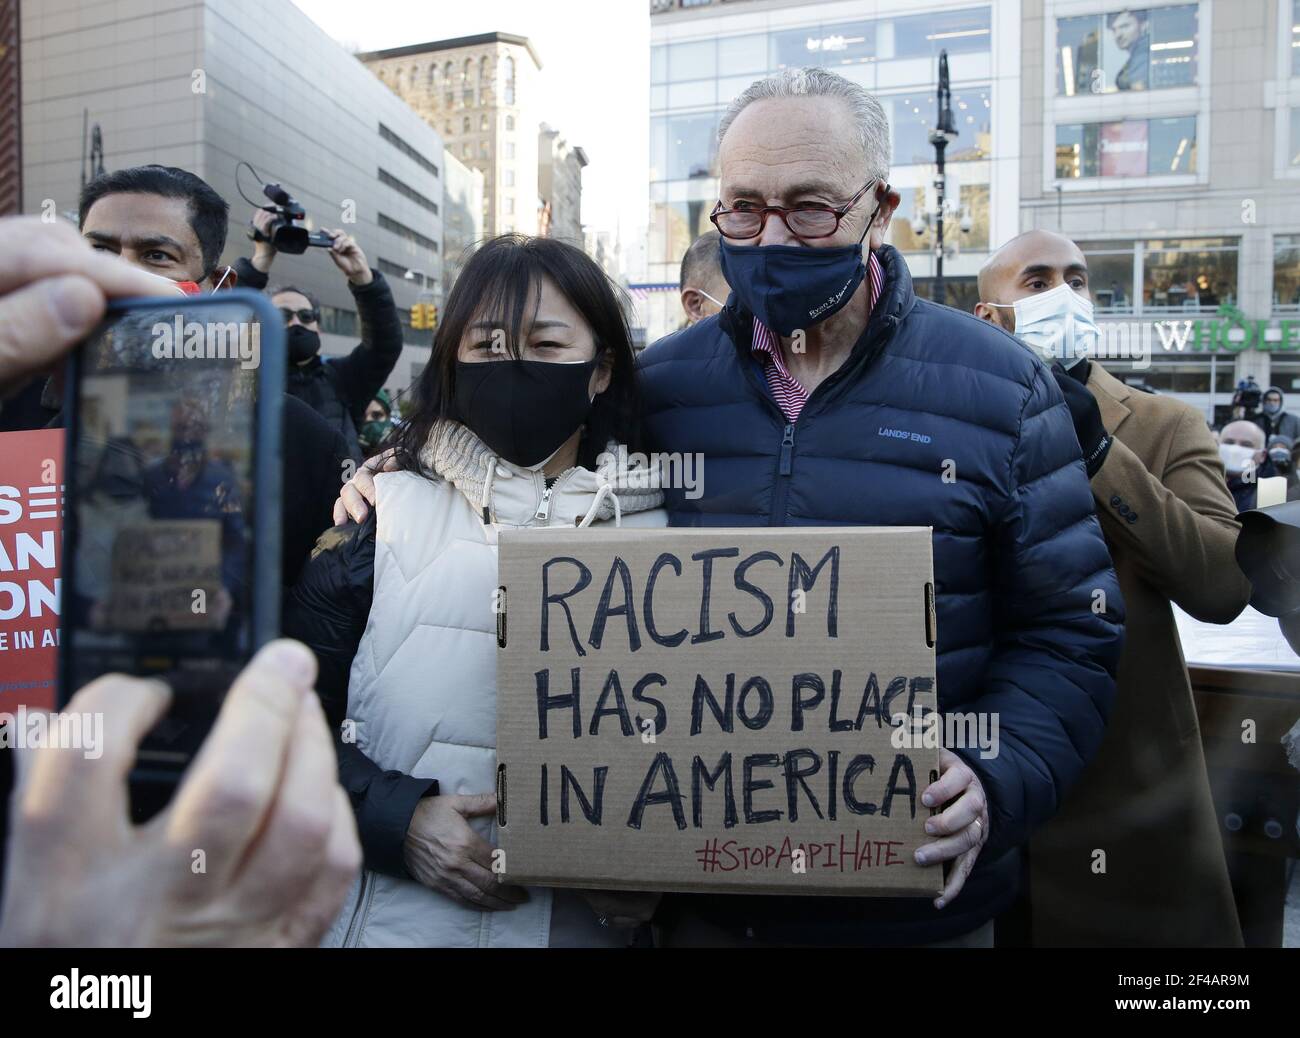 New York, United States. 19th Mar, 2021. Sen. Chuck Schumer holds up a sign that says Racism Has No Place In America at a Vigil for Peace organized by Asian American Federation in Union Square in New York City on Friday, March 19, 2021. President Biden on Friday urged Congress to pass hate crime legislation to address the increase in discrimination and violence against Asian Americans during the COVID-19 pandemic. Photo by John Angelillo/UPI Credit: UPI/Alamy Live News Stock Photo